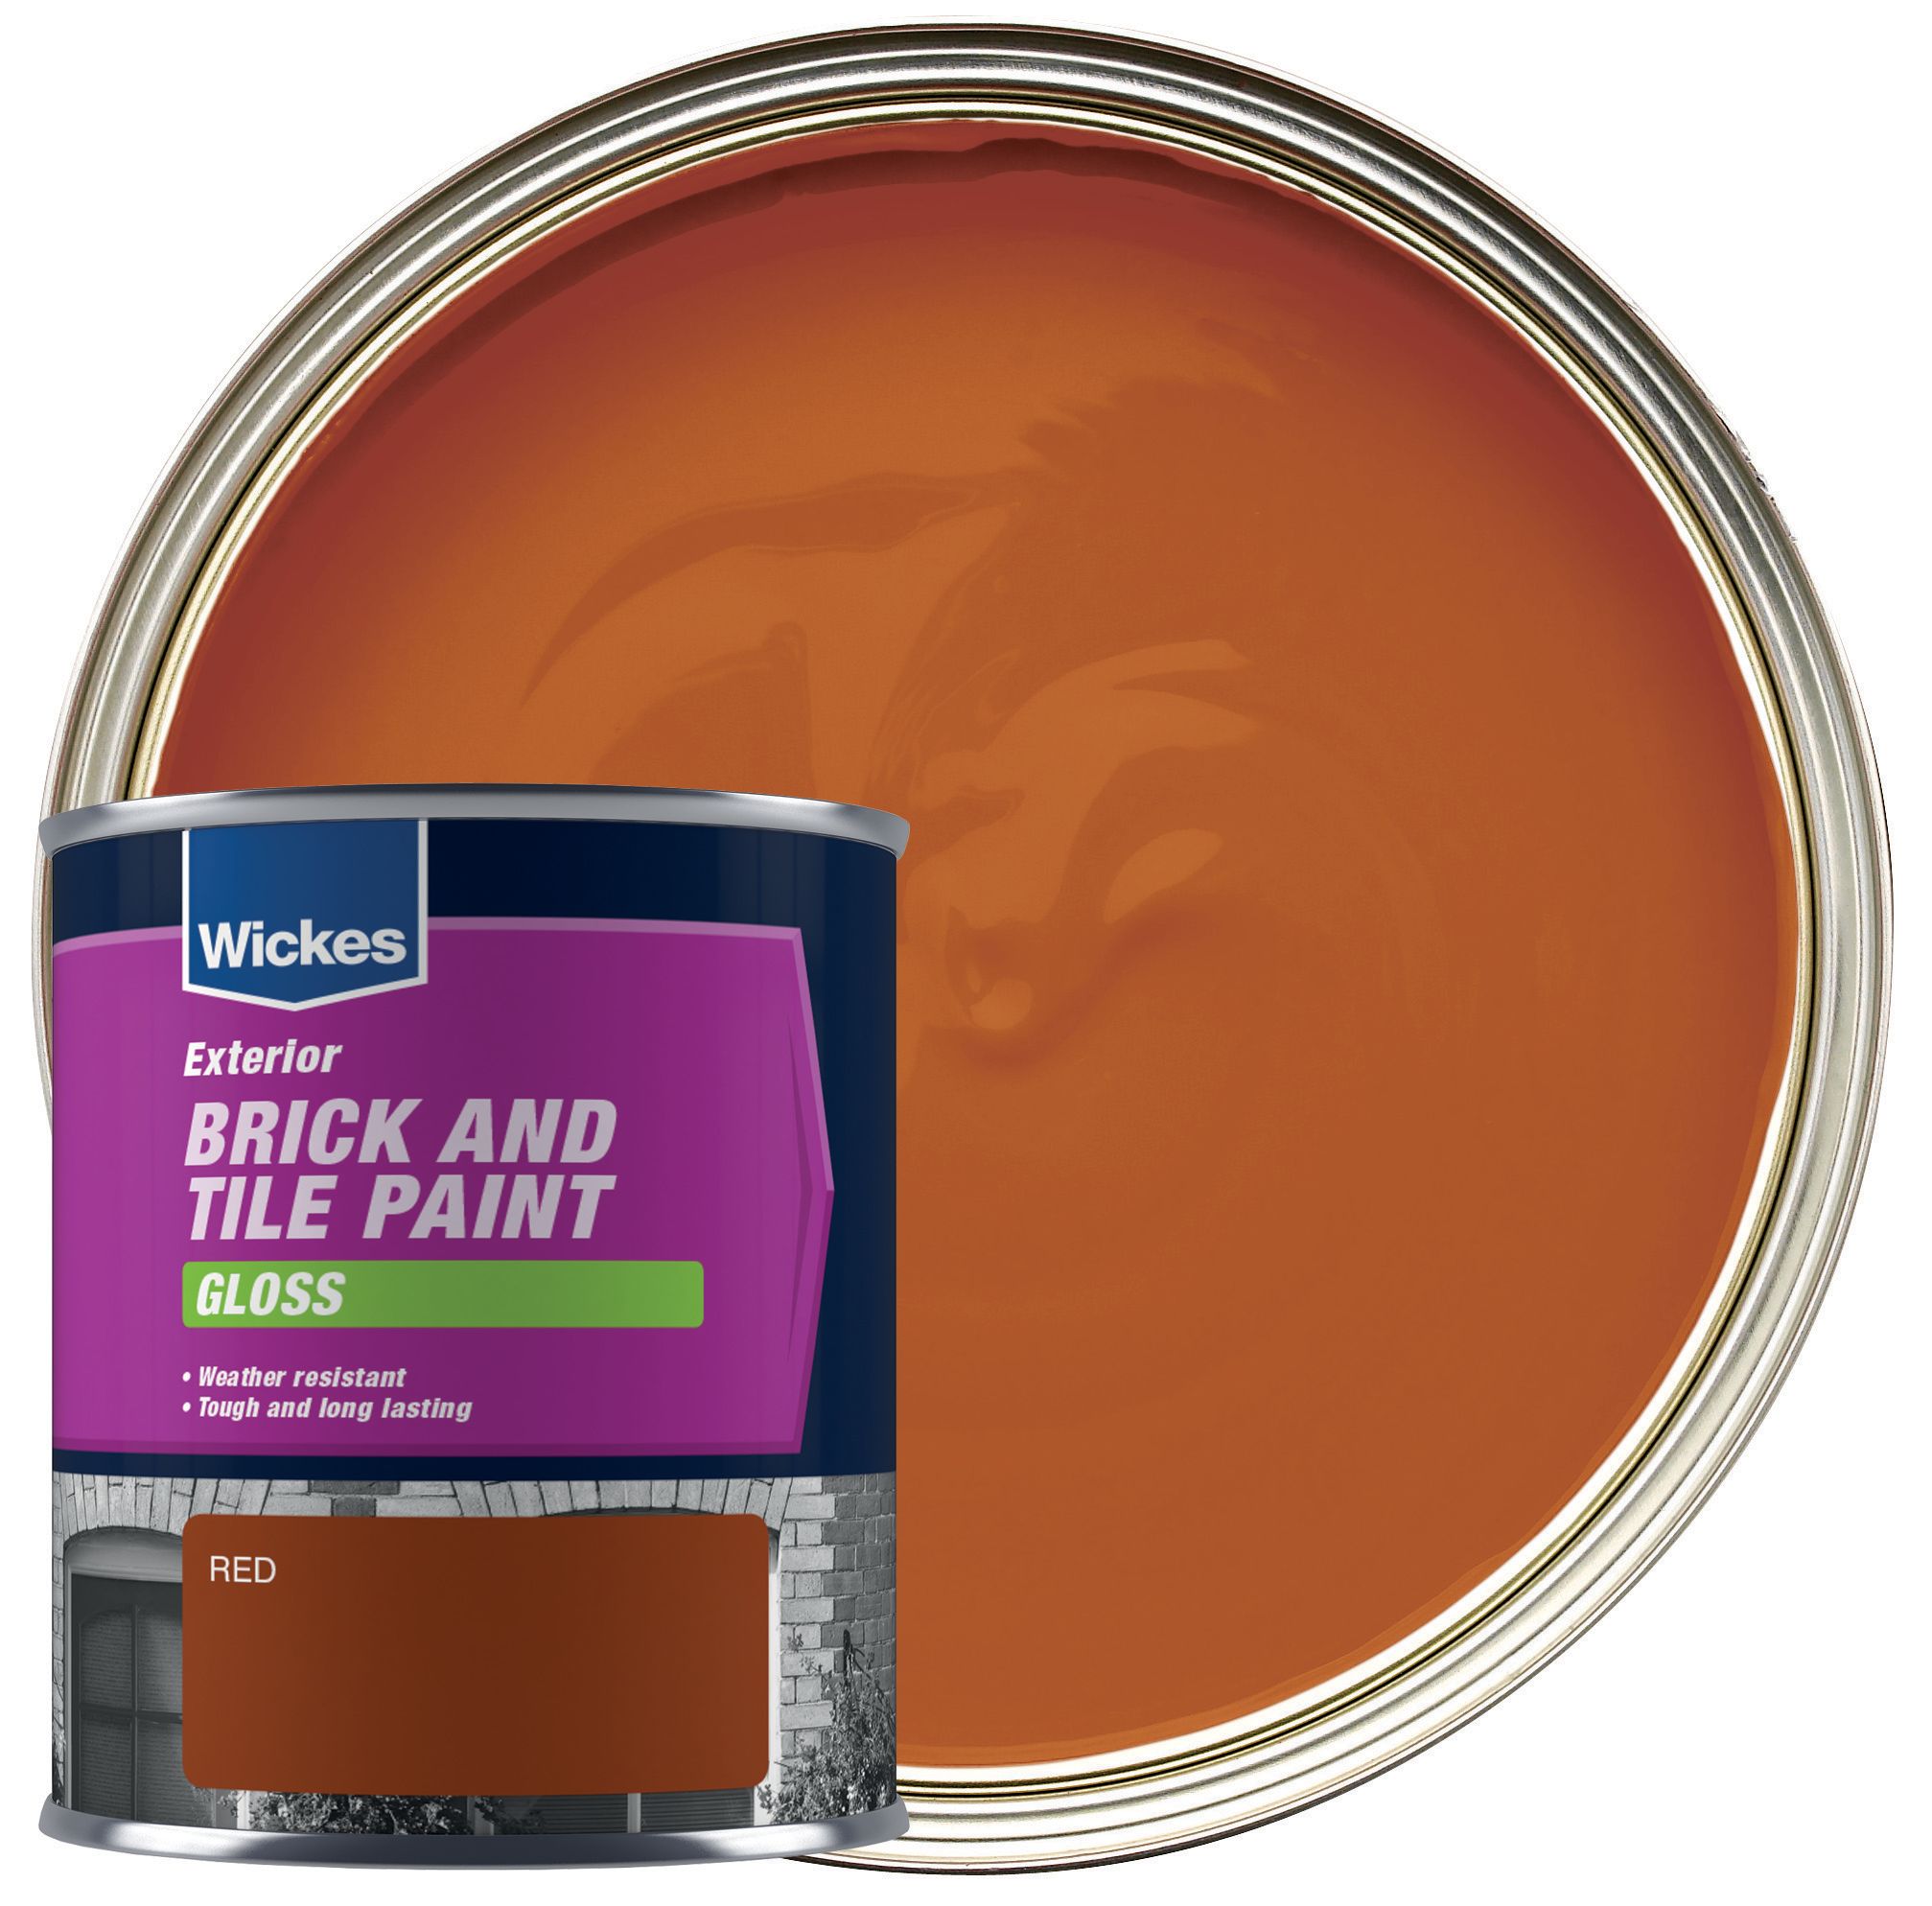 Image of Wickes Brick & Tile Gloss Paint - Red - 750ml